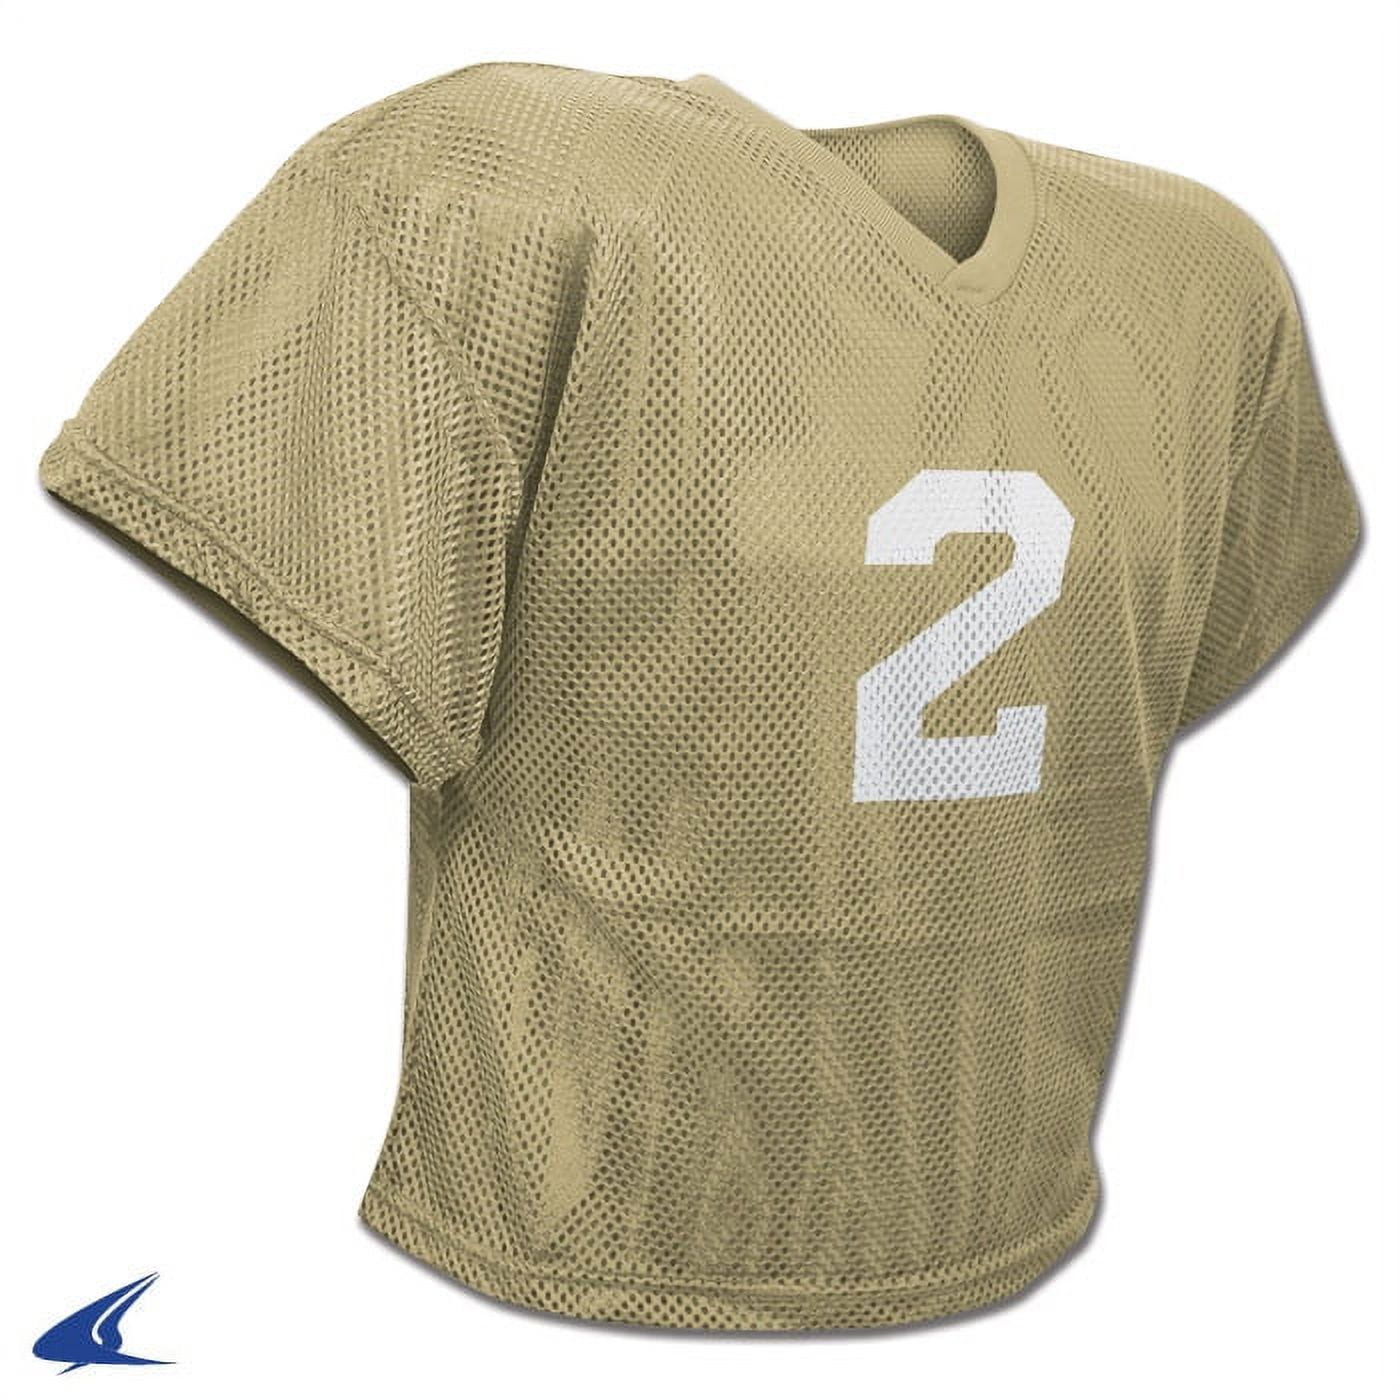 Polyester Porthole Mesh Practice Football Jersey by Champro Sports Style  Number FJ2